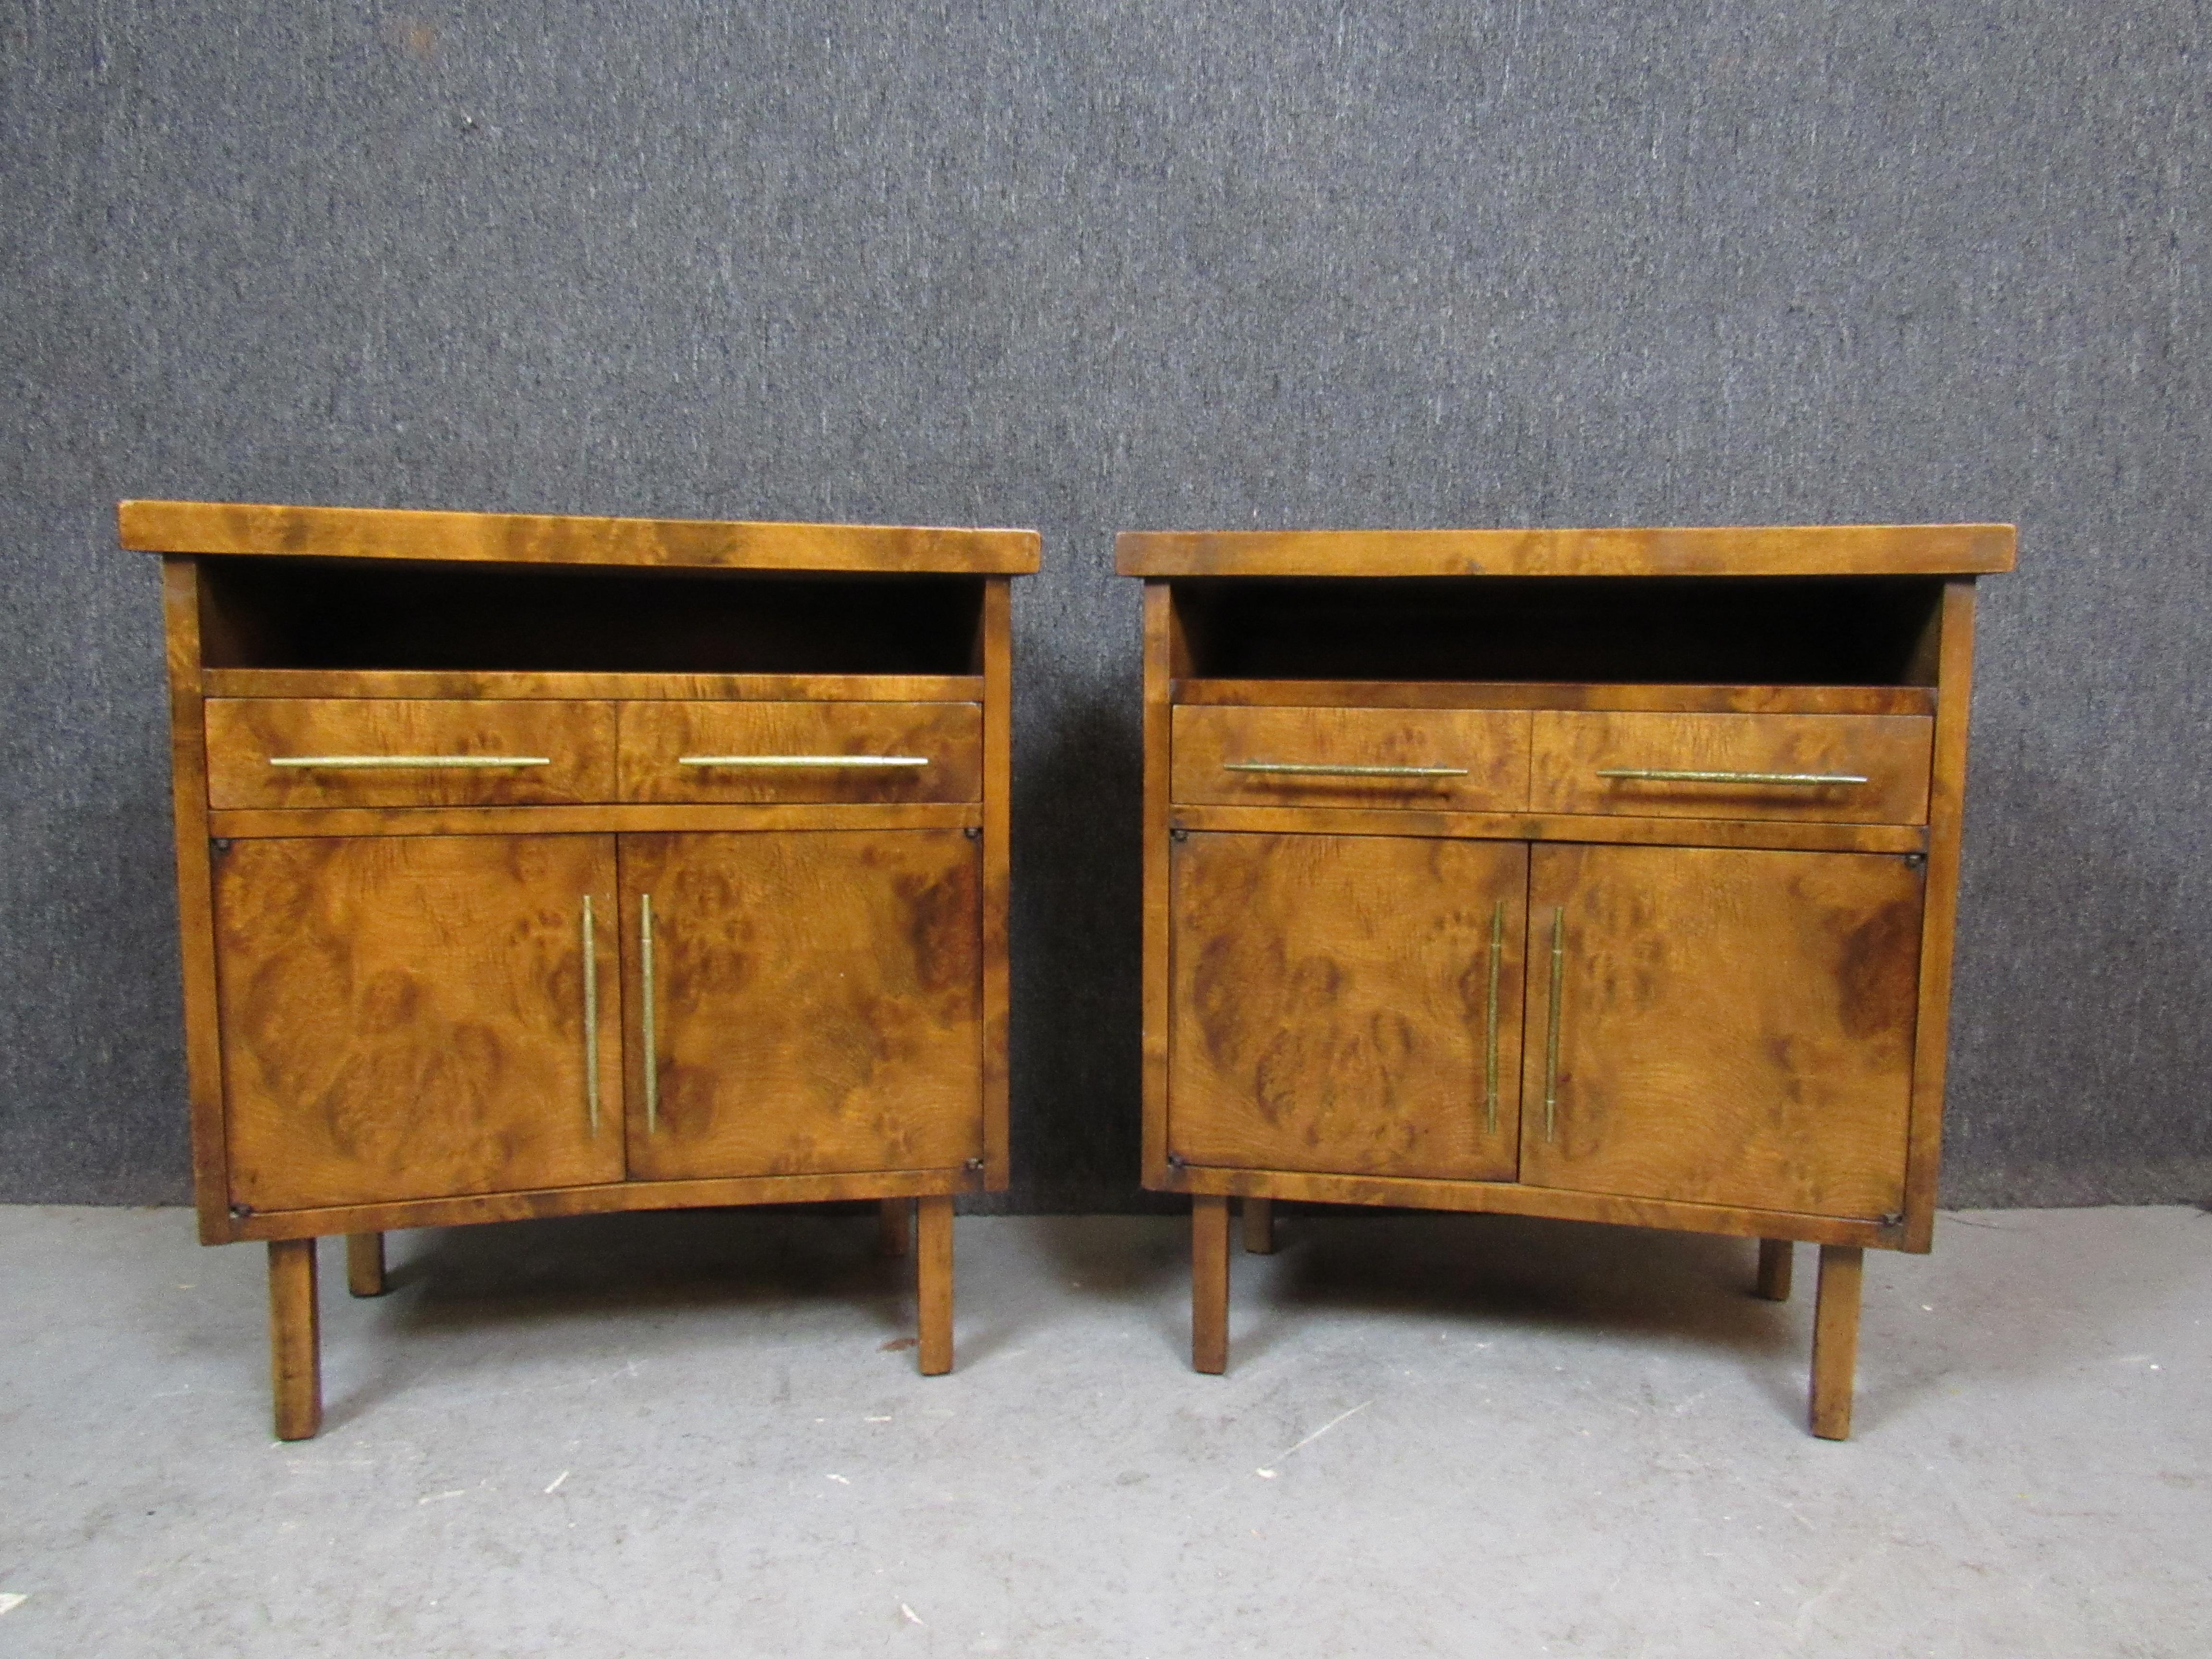 Exceptionally rare burled walnut nightstands from Harold Schwartz' iconic mid-century bedroom collection for Batesville, Indiana's RomWeber Furniture. The swirling natural wood grains create a wonderful contrast with the nightstand's classic